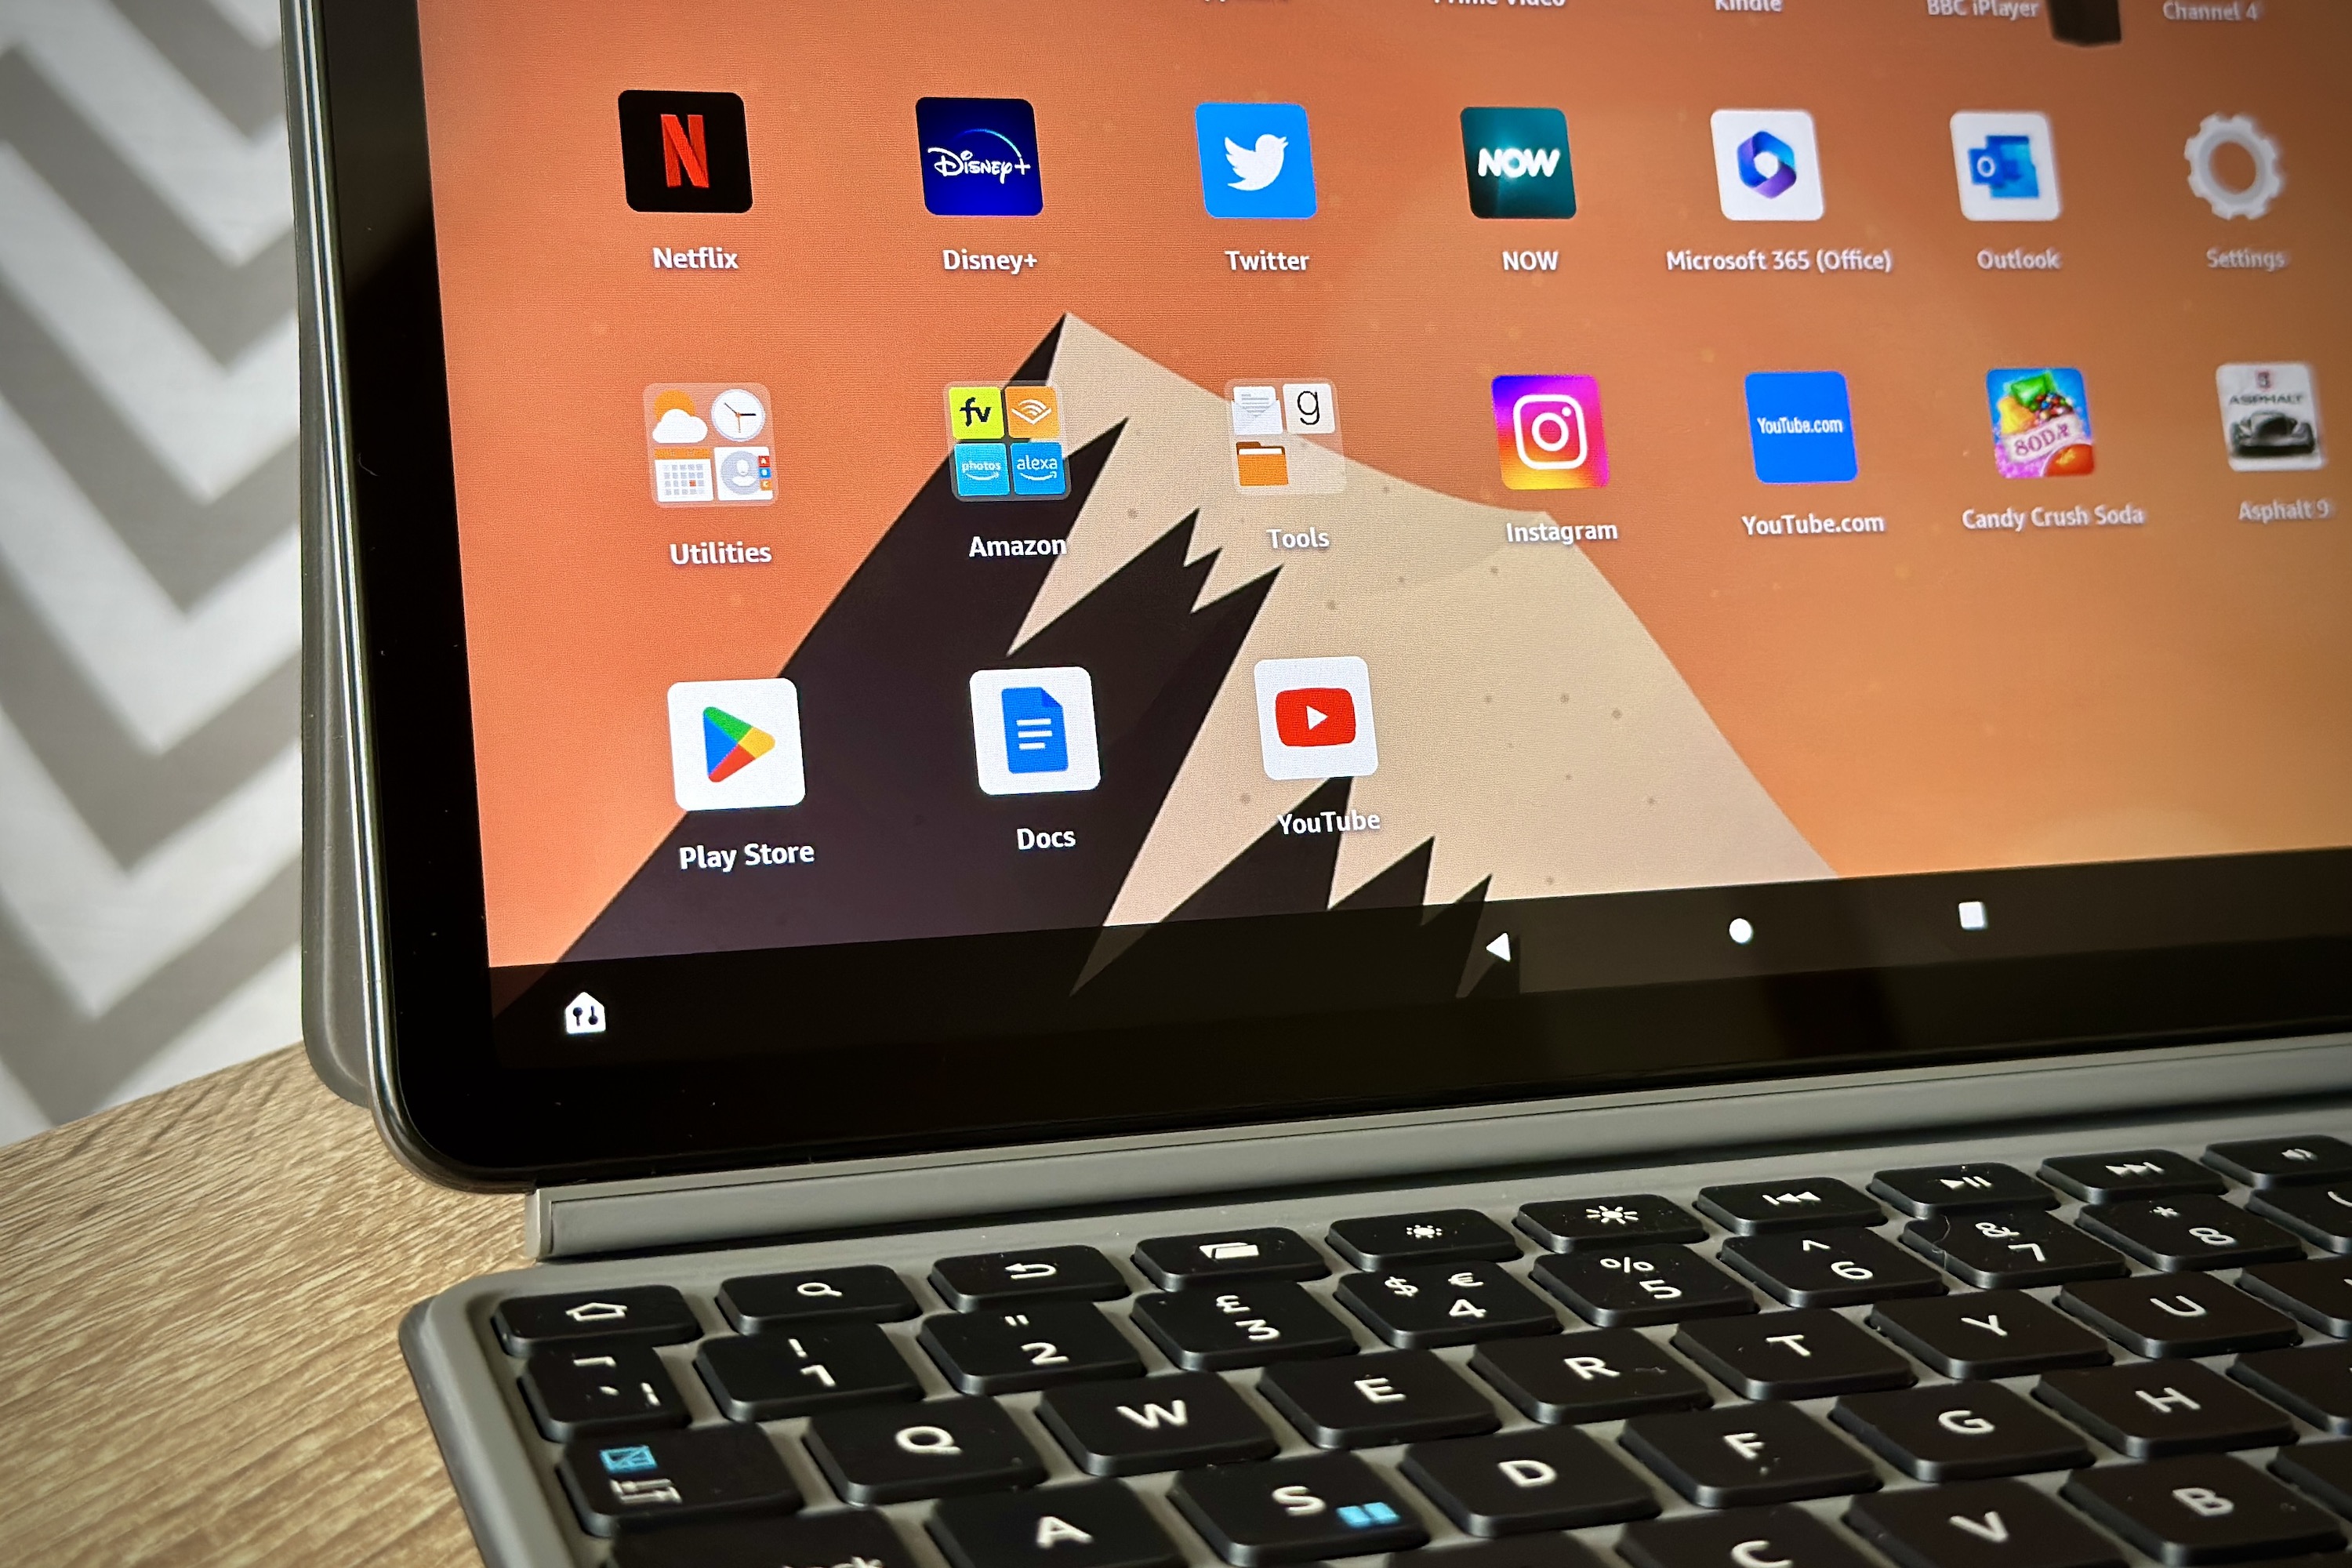 HOW to INSTALL GOOGLE PLAY STORE on  FIRE tablet